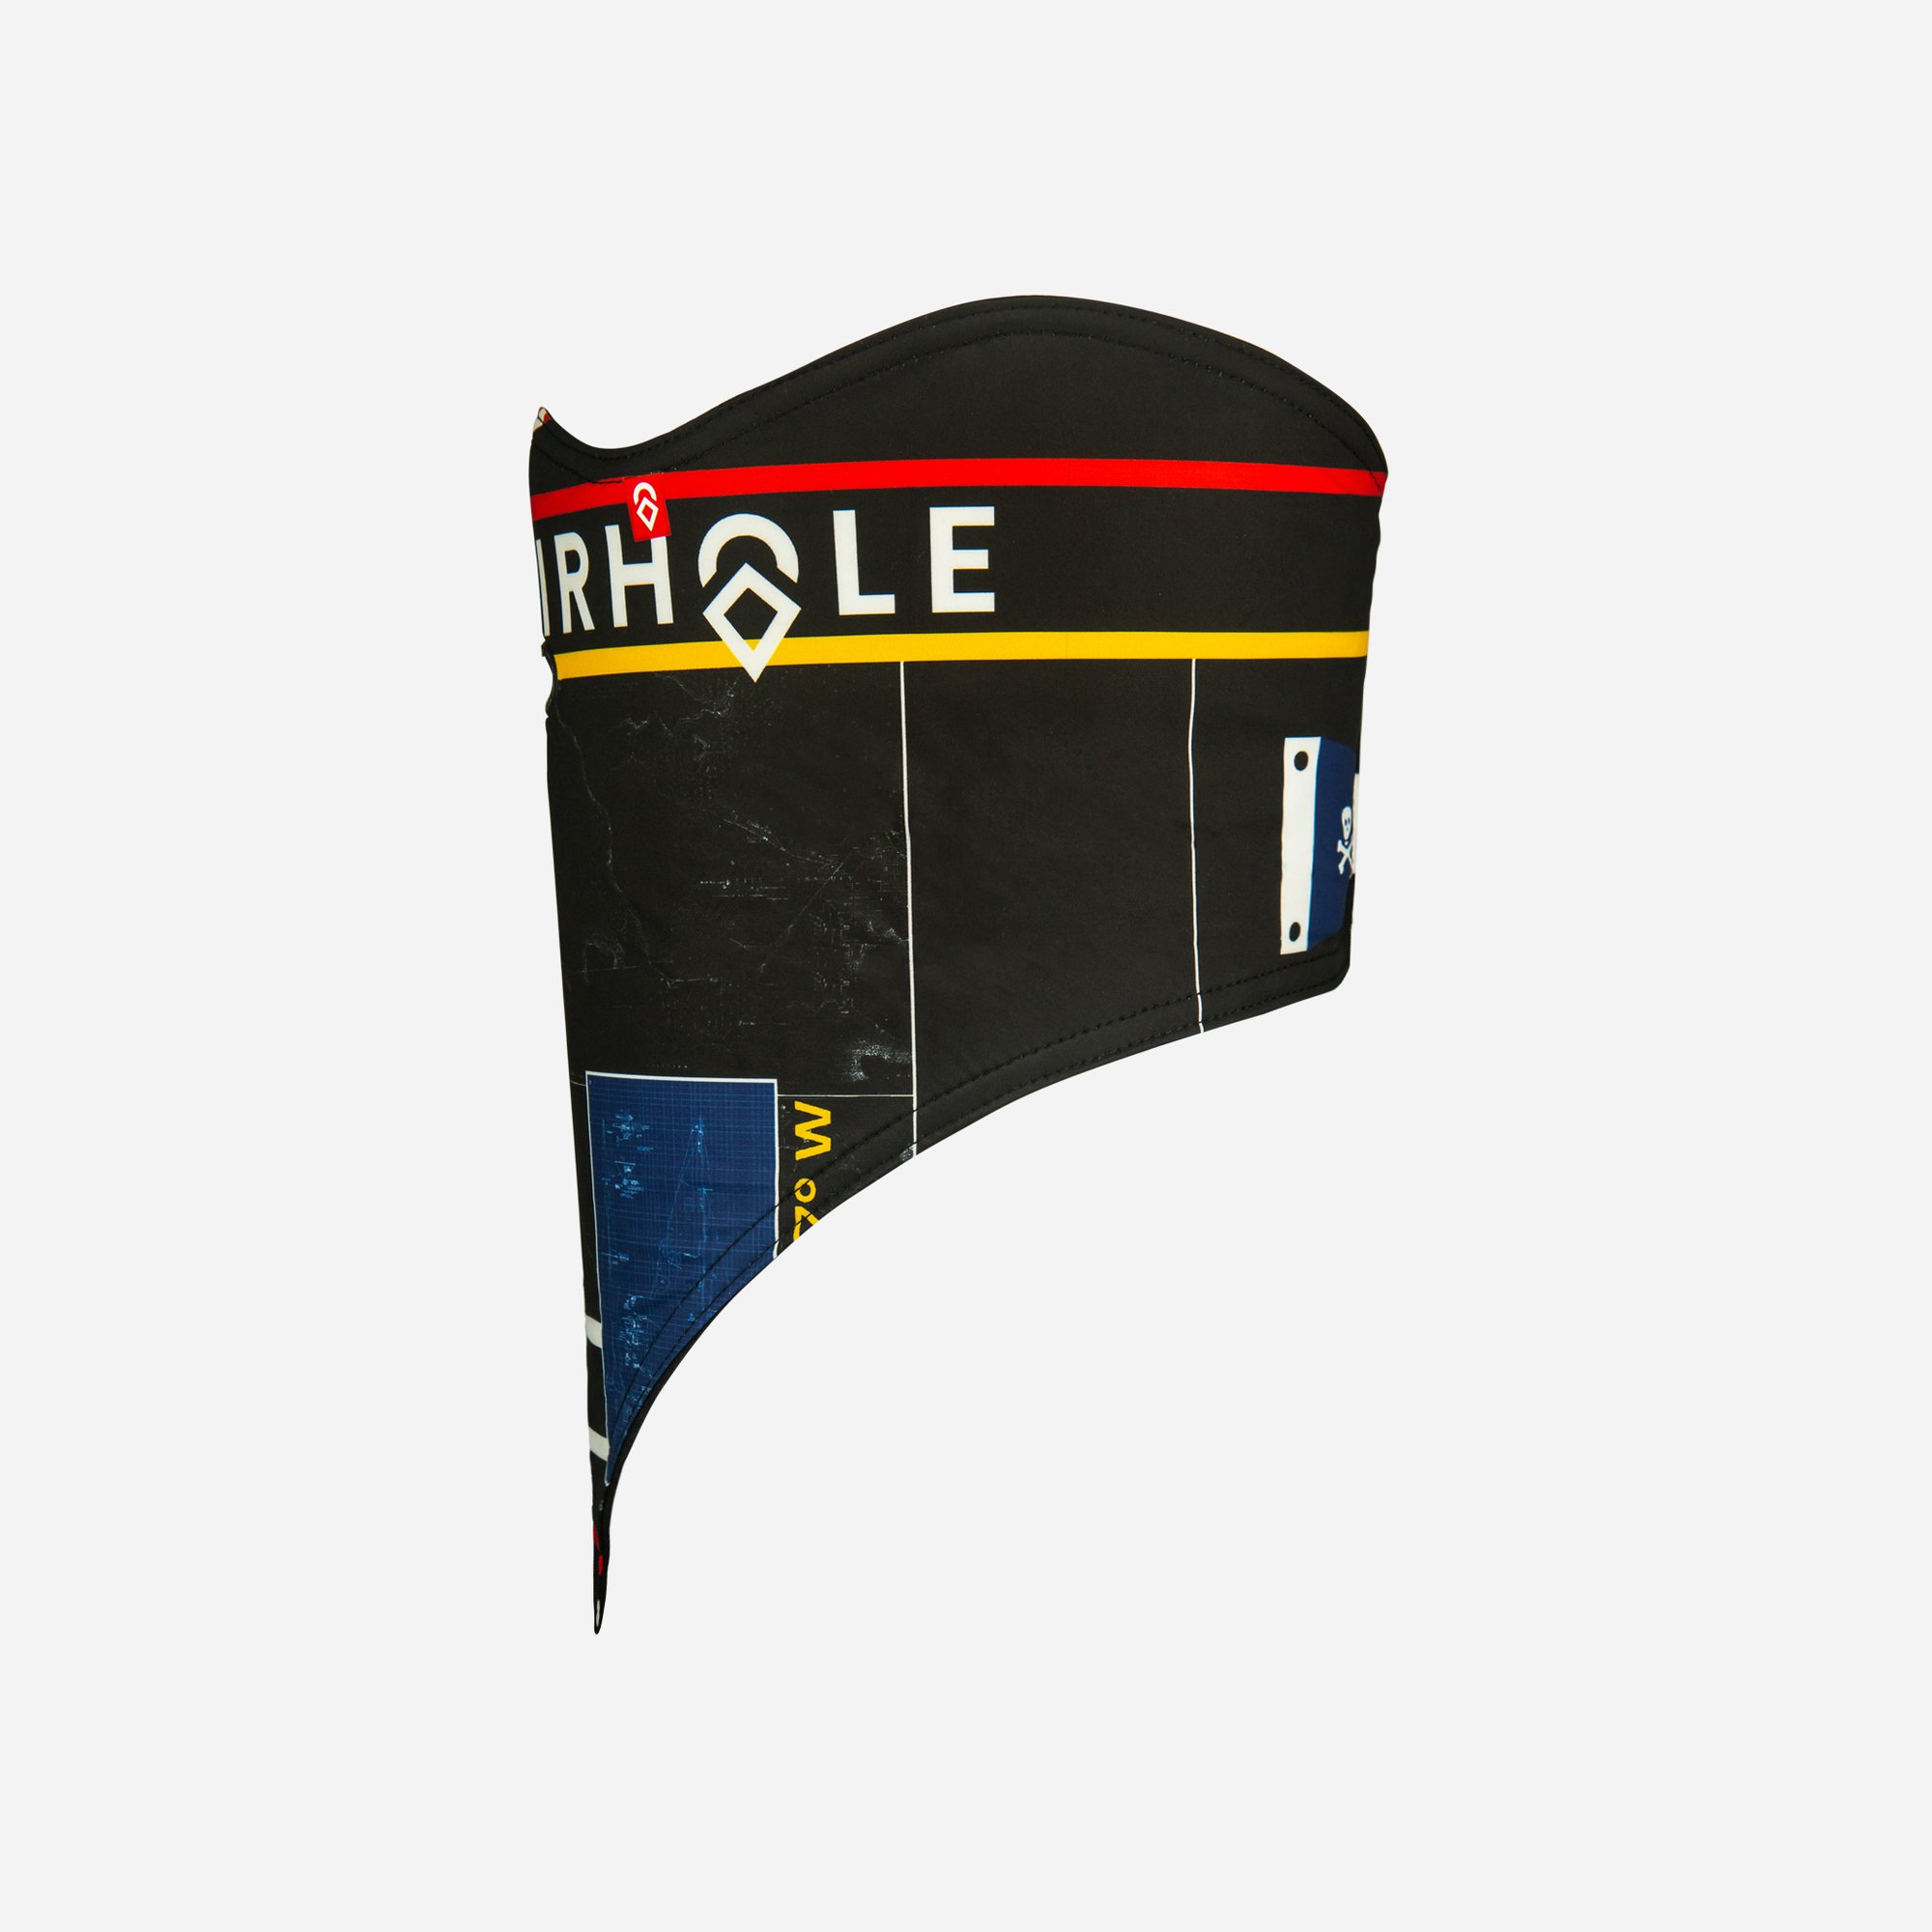 Airhole Facemask Standard squadron